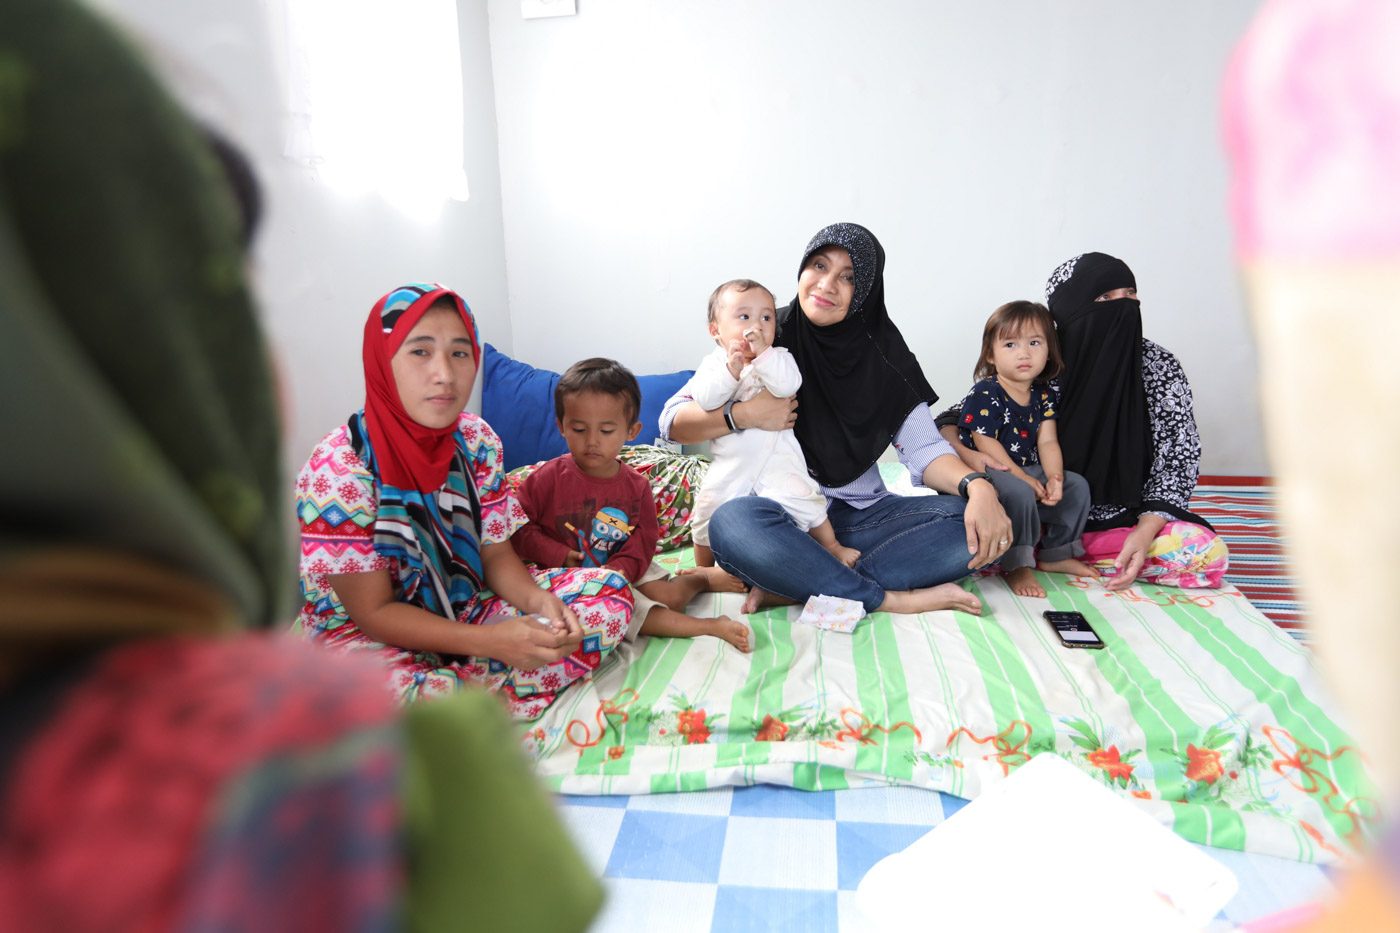 SHARING STORIES. Vice President Leni Robredo interacts with members of a family who will live in one of the housing units at the Angat Buhay Village in Marawi City. Photo from OVP 